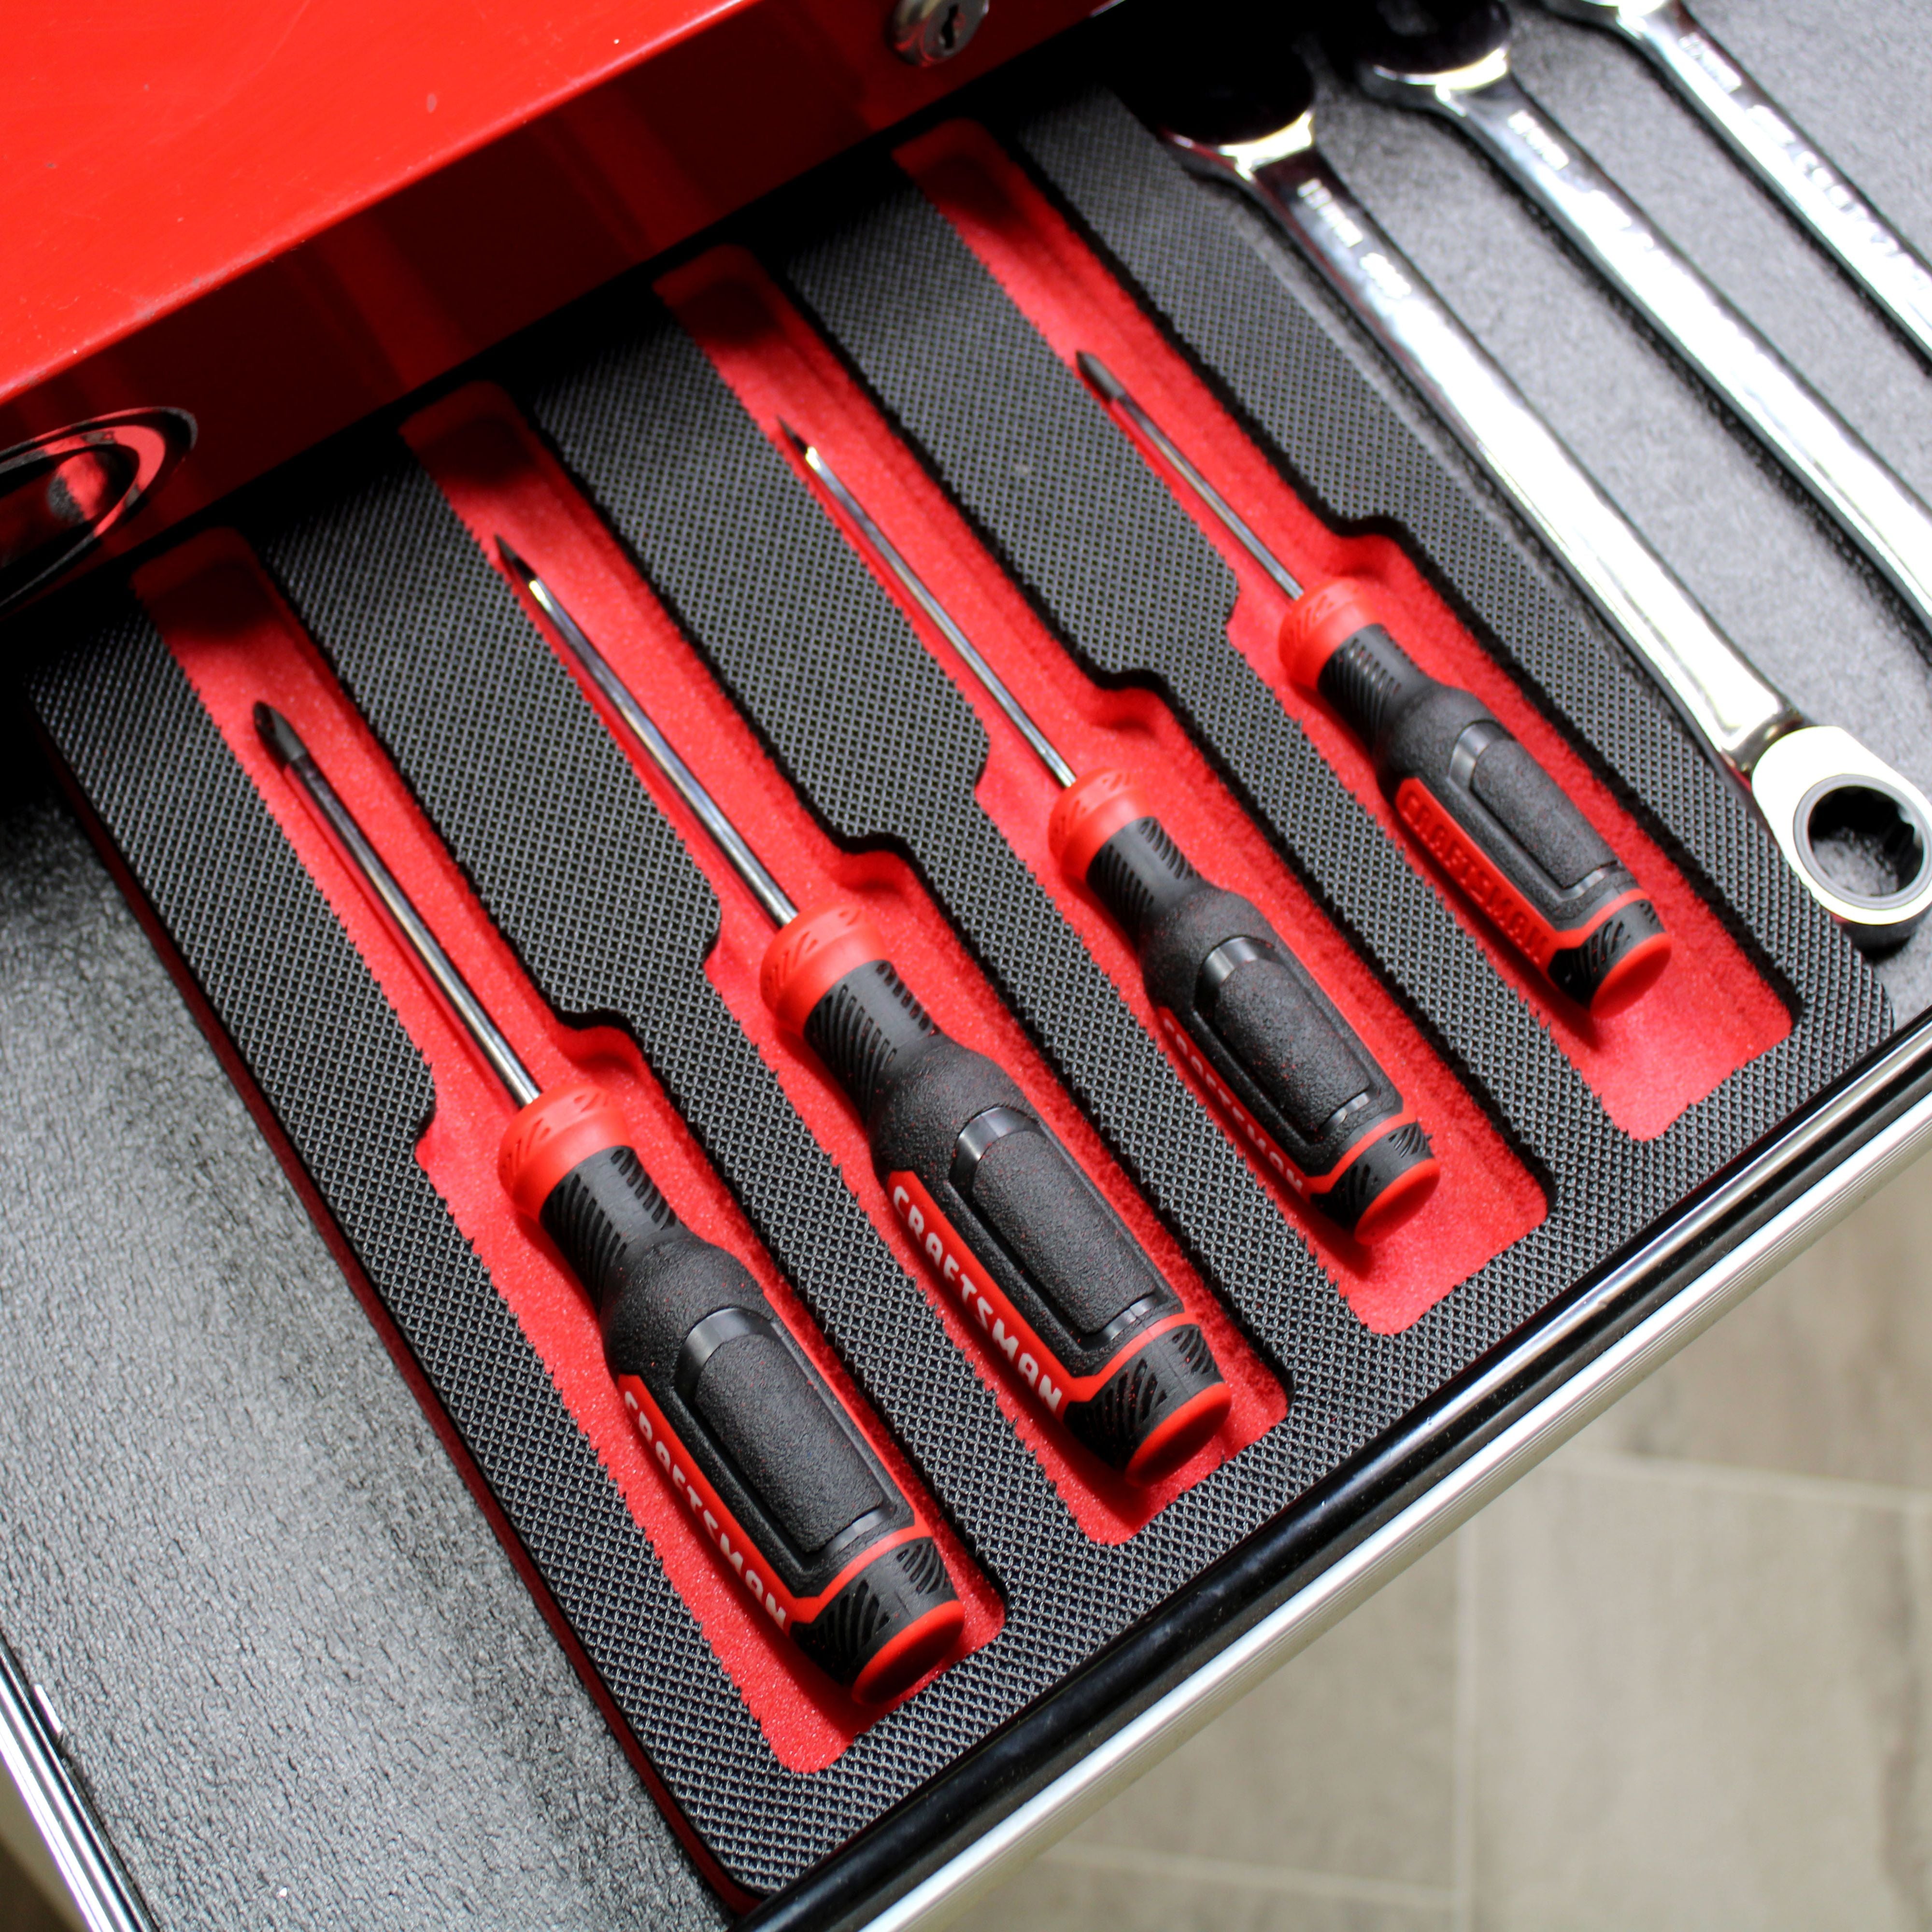 Tool Drawer Organizer Screwdriver Holder Insert Red Black Durable Foam Tray Holds 4 Drivers Up To 10 Inches Fits Craftsman Husky Kobalt Milwaukee Many Others